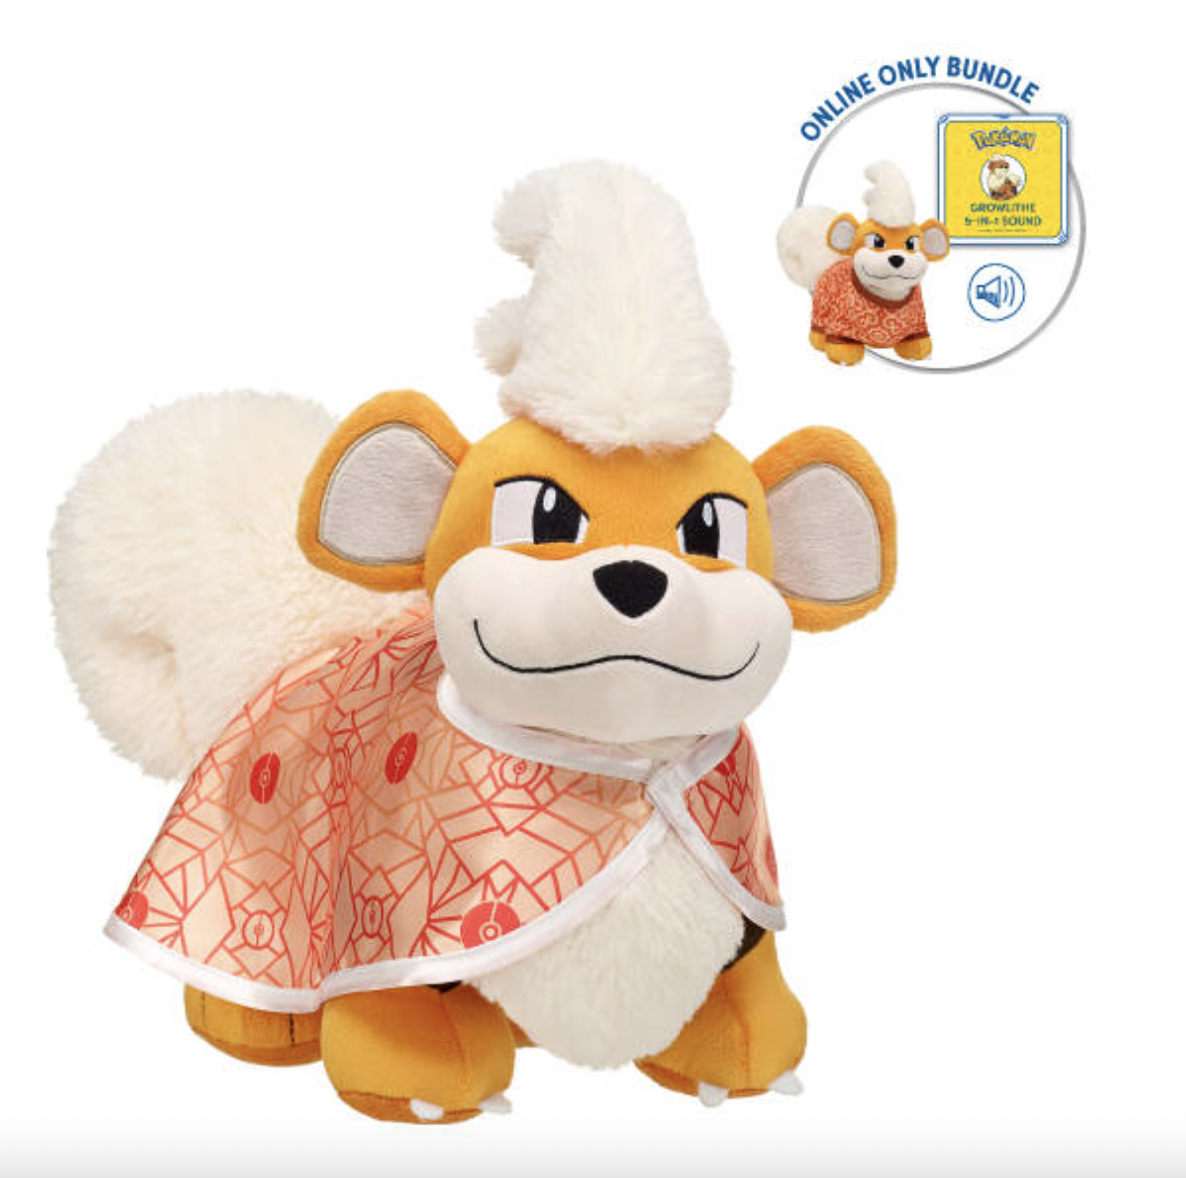 Build-a-Bear Growlithe Joins Its Pokemon Plush Collection